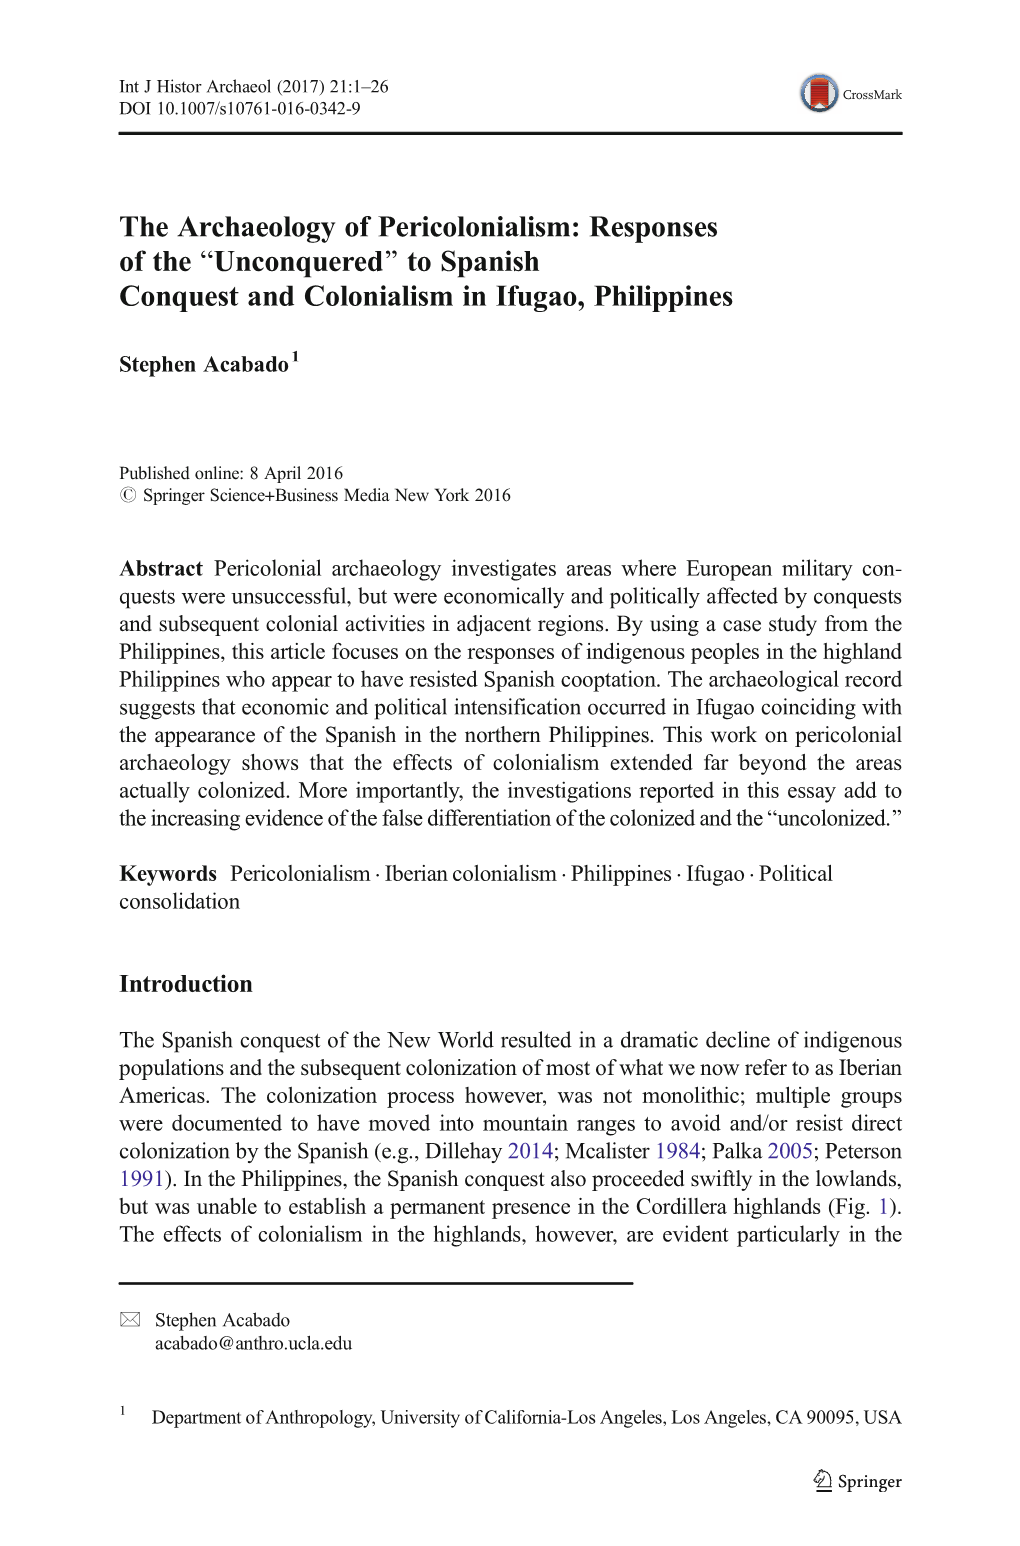 To Spanish Conquest and Colonialism in Ifugao, Philippines